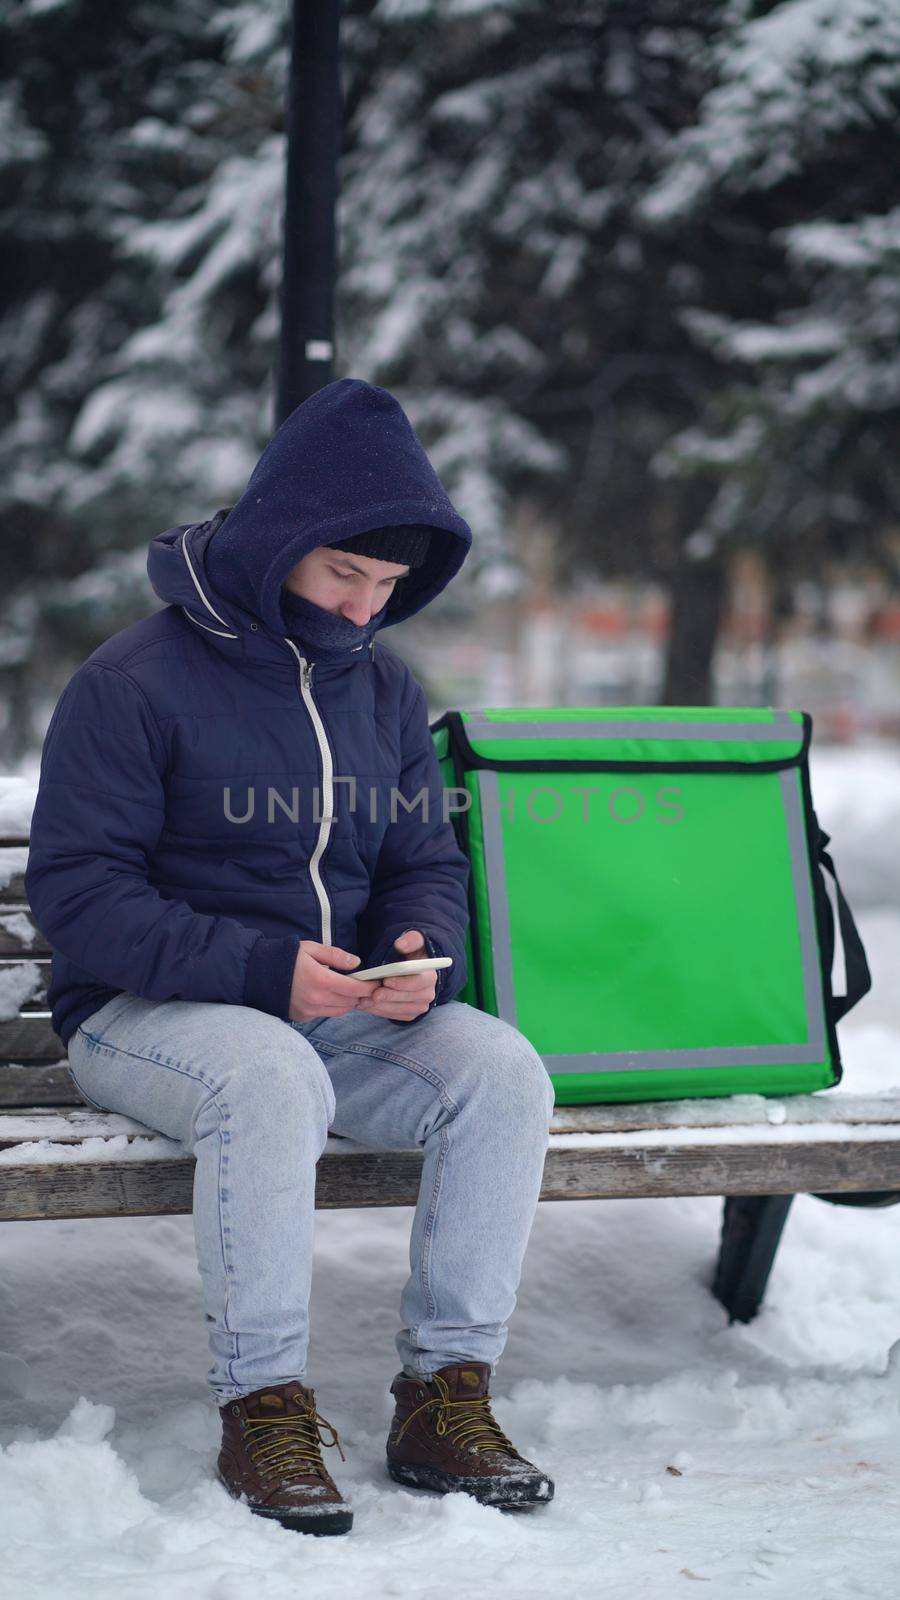 delivery boy with an insulated backpack looking for the client's address in the delivery app.